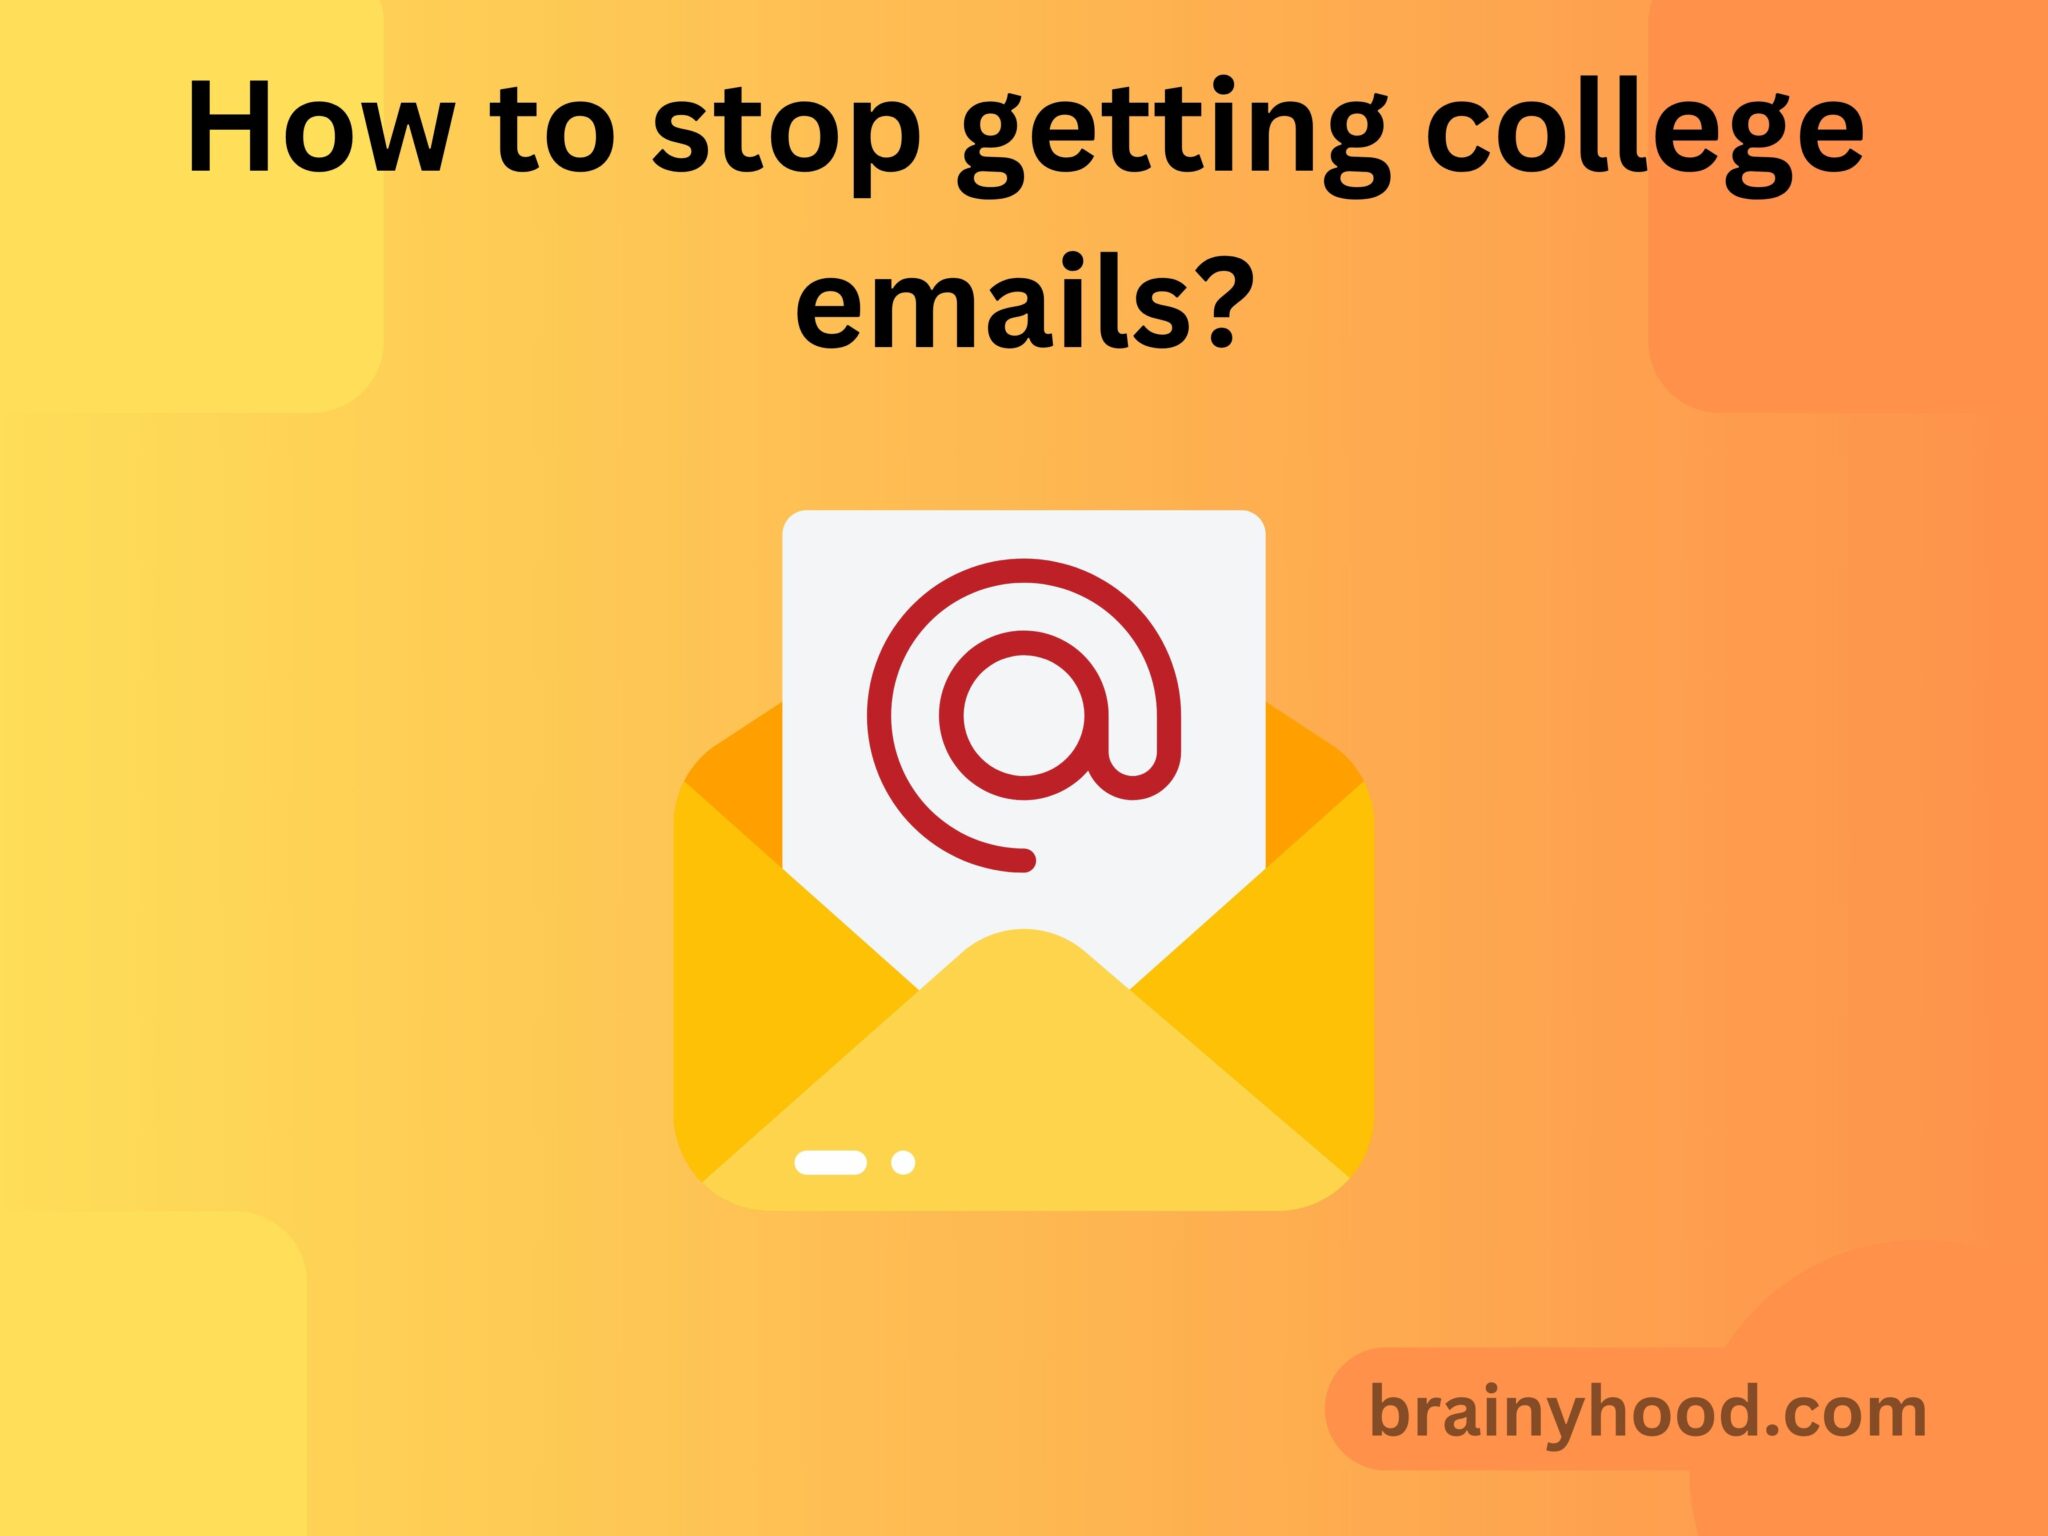 How to stop getting college emails?